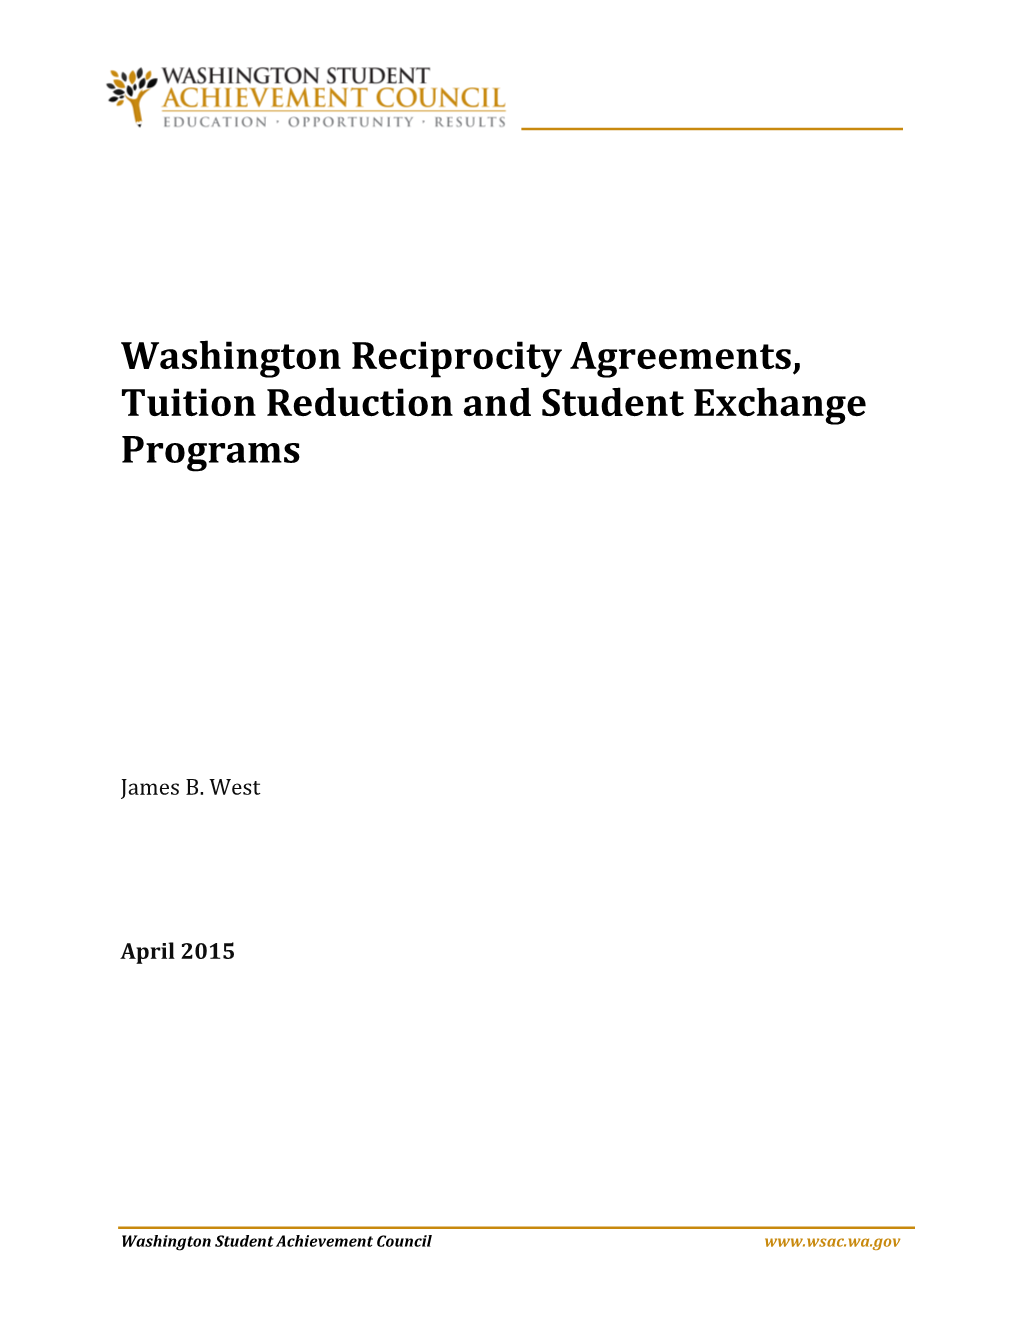 Washington Reciprocity Agreements, Tuition Reduction and Student Exchange Programs